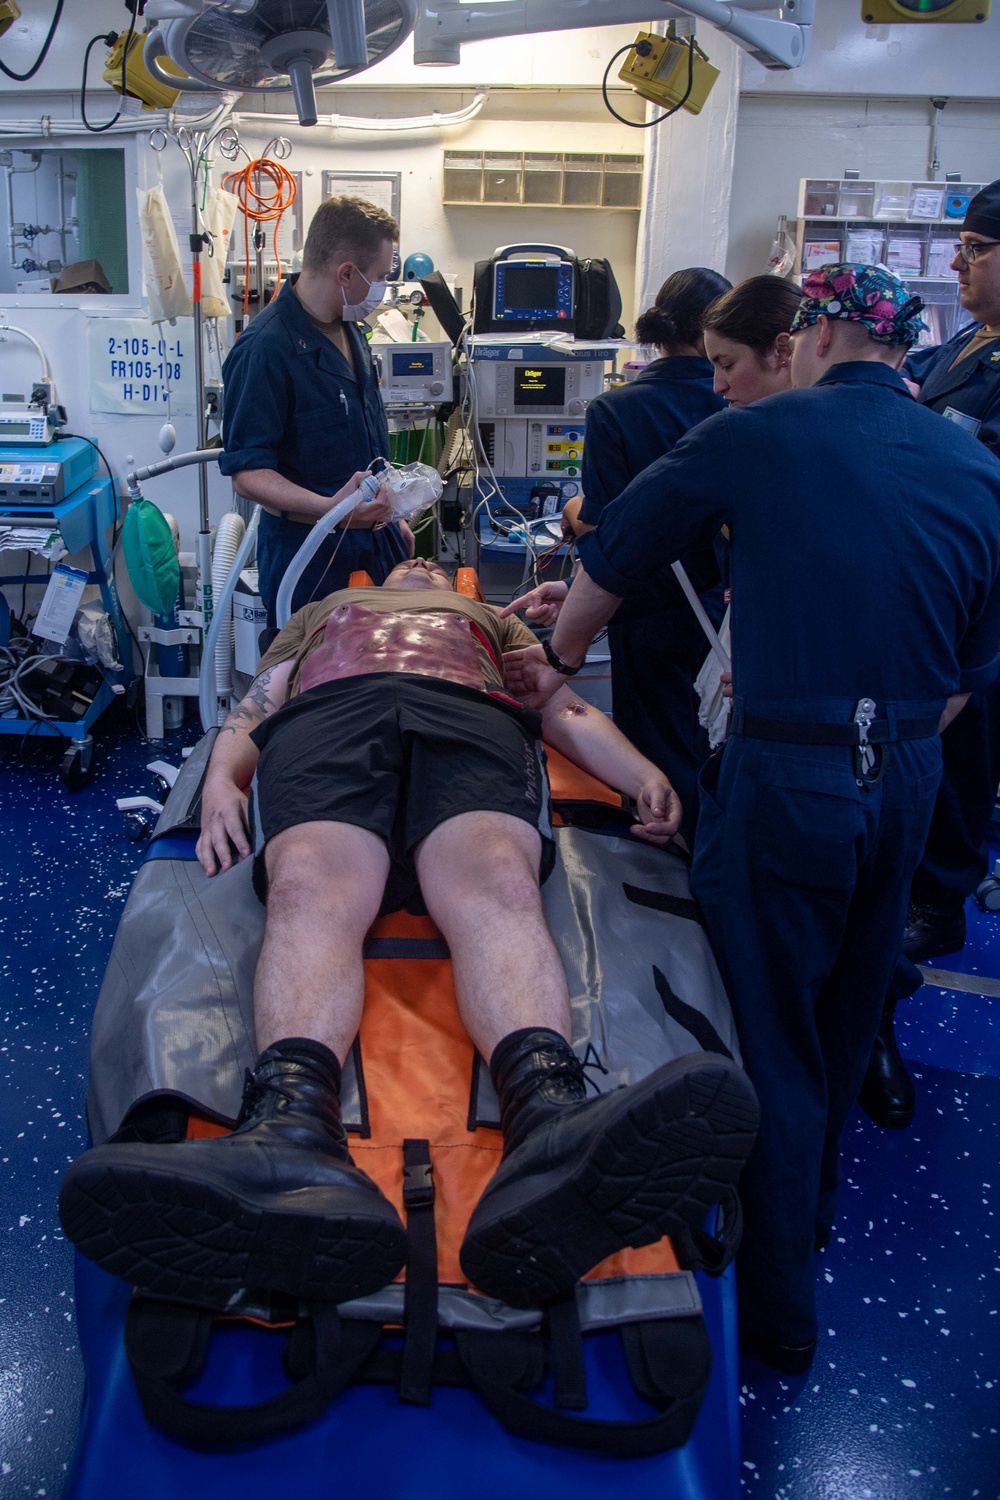 Medical Mass Casualty Drill